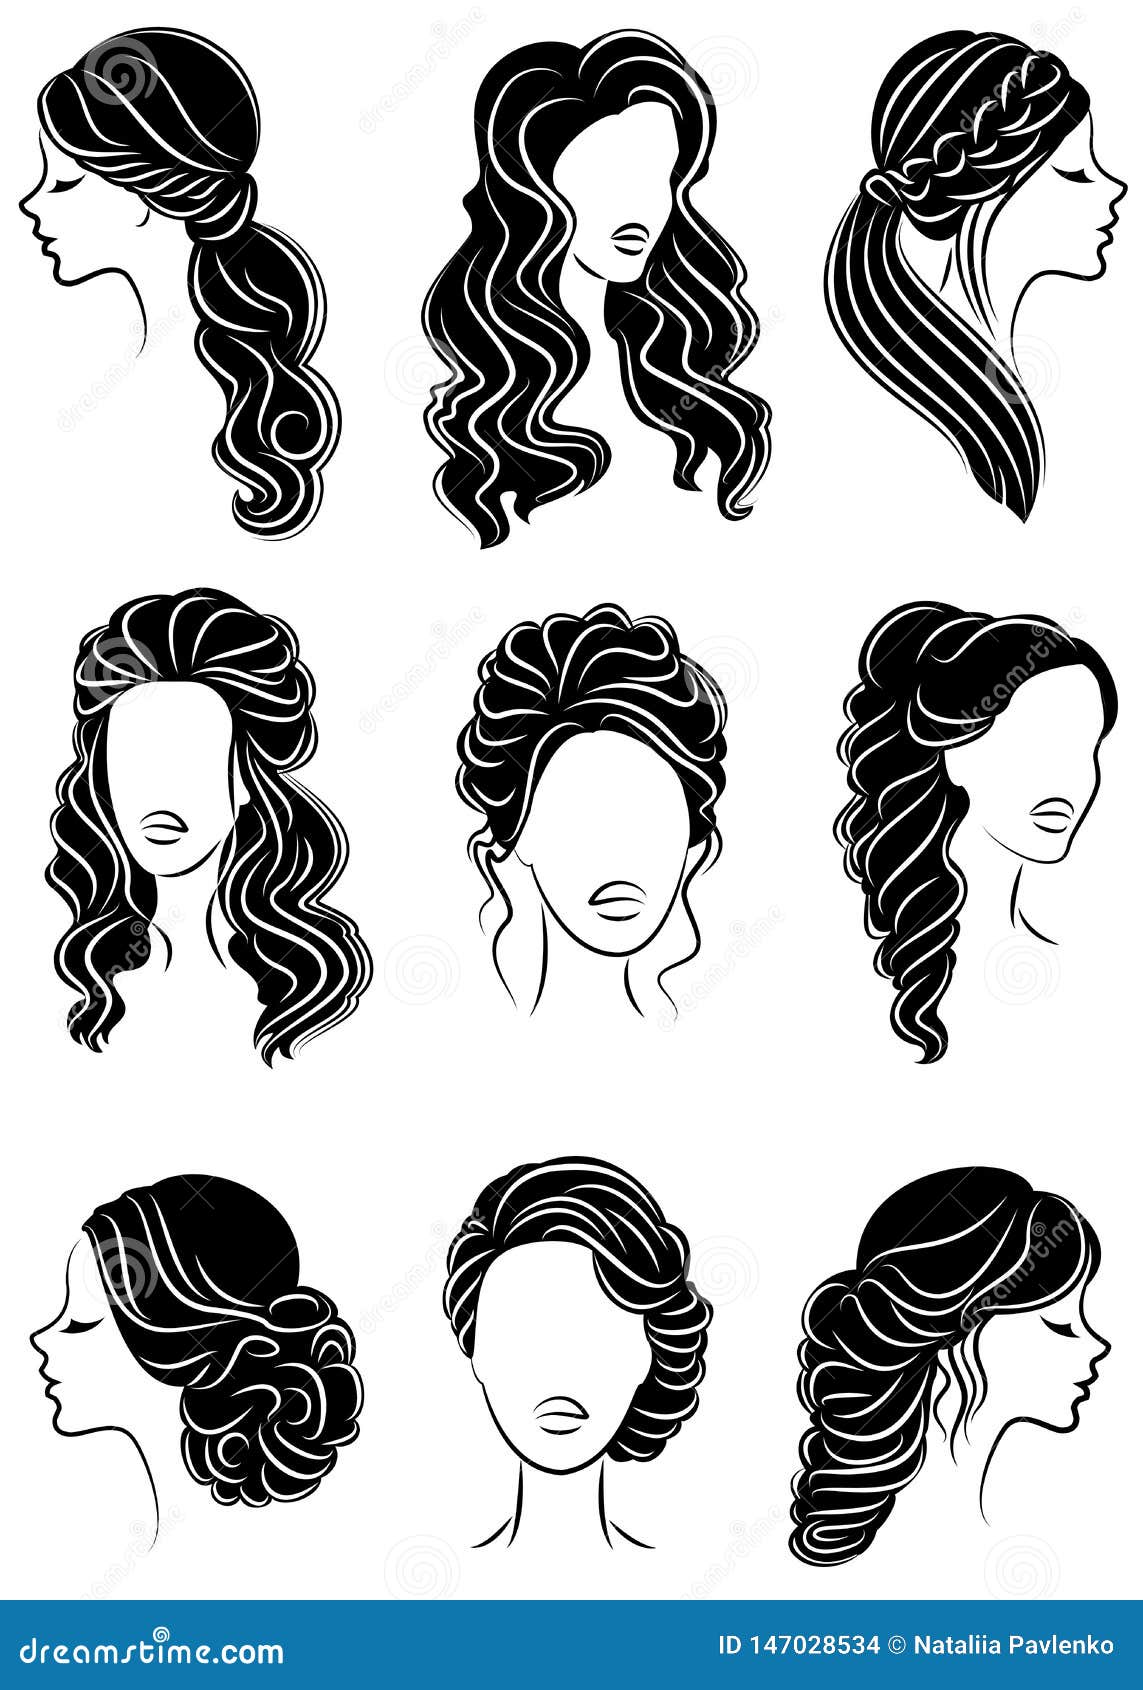 Collection Silhouette Profile Of A Cute Lady S Head The